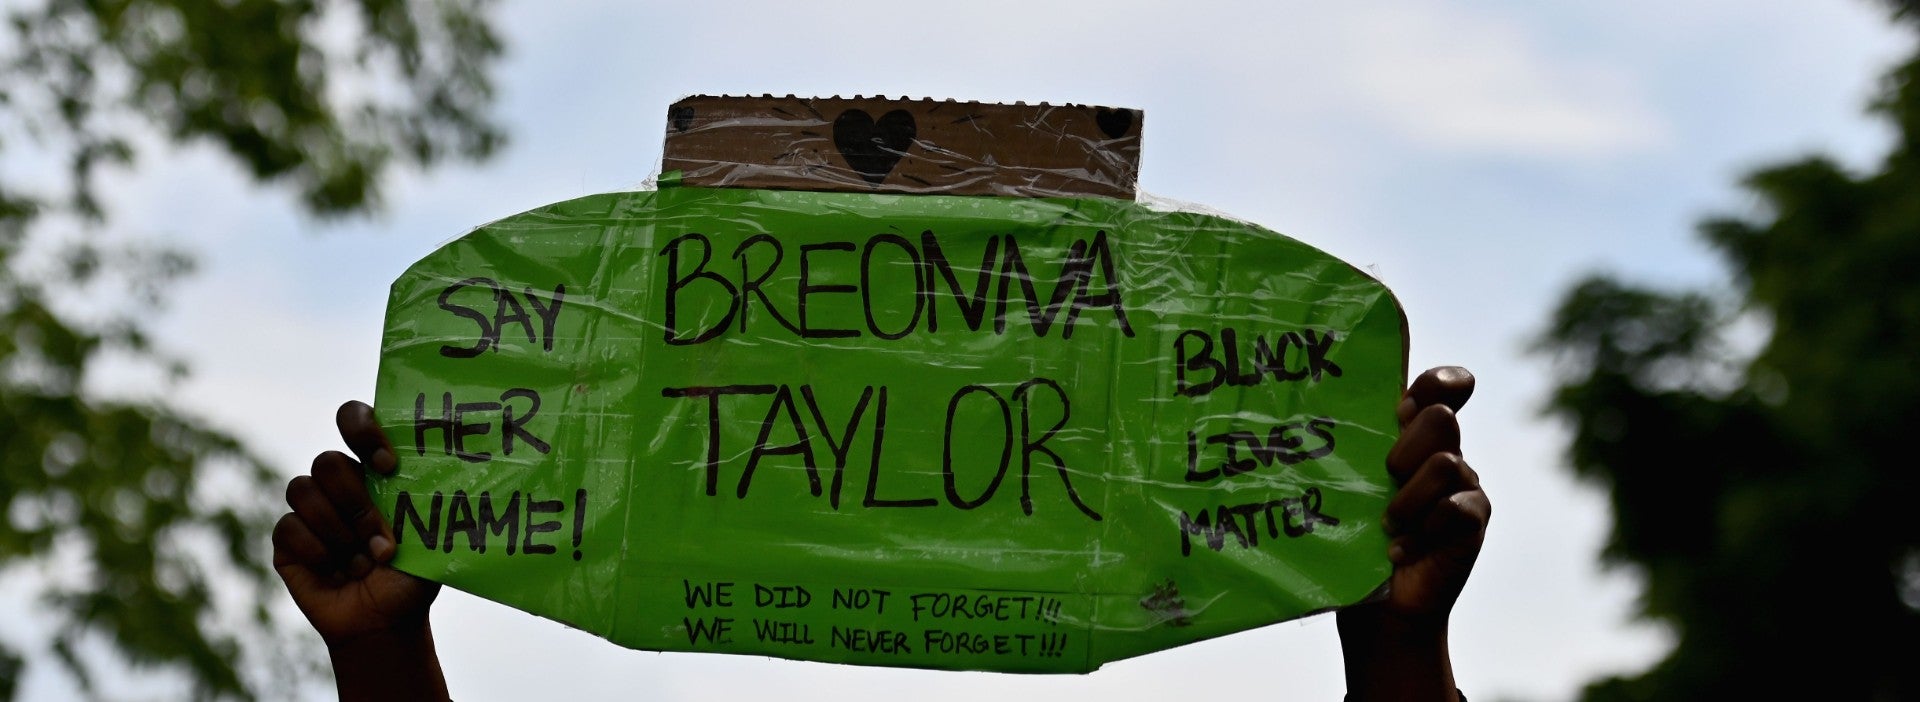 #SayHerName: On Breonna Taylor's Birthday She Deserves Justice